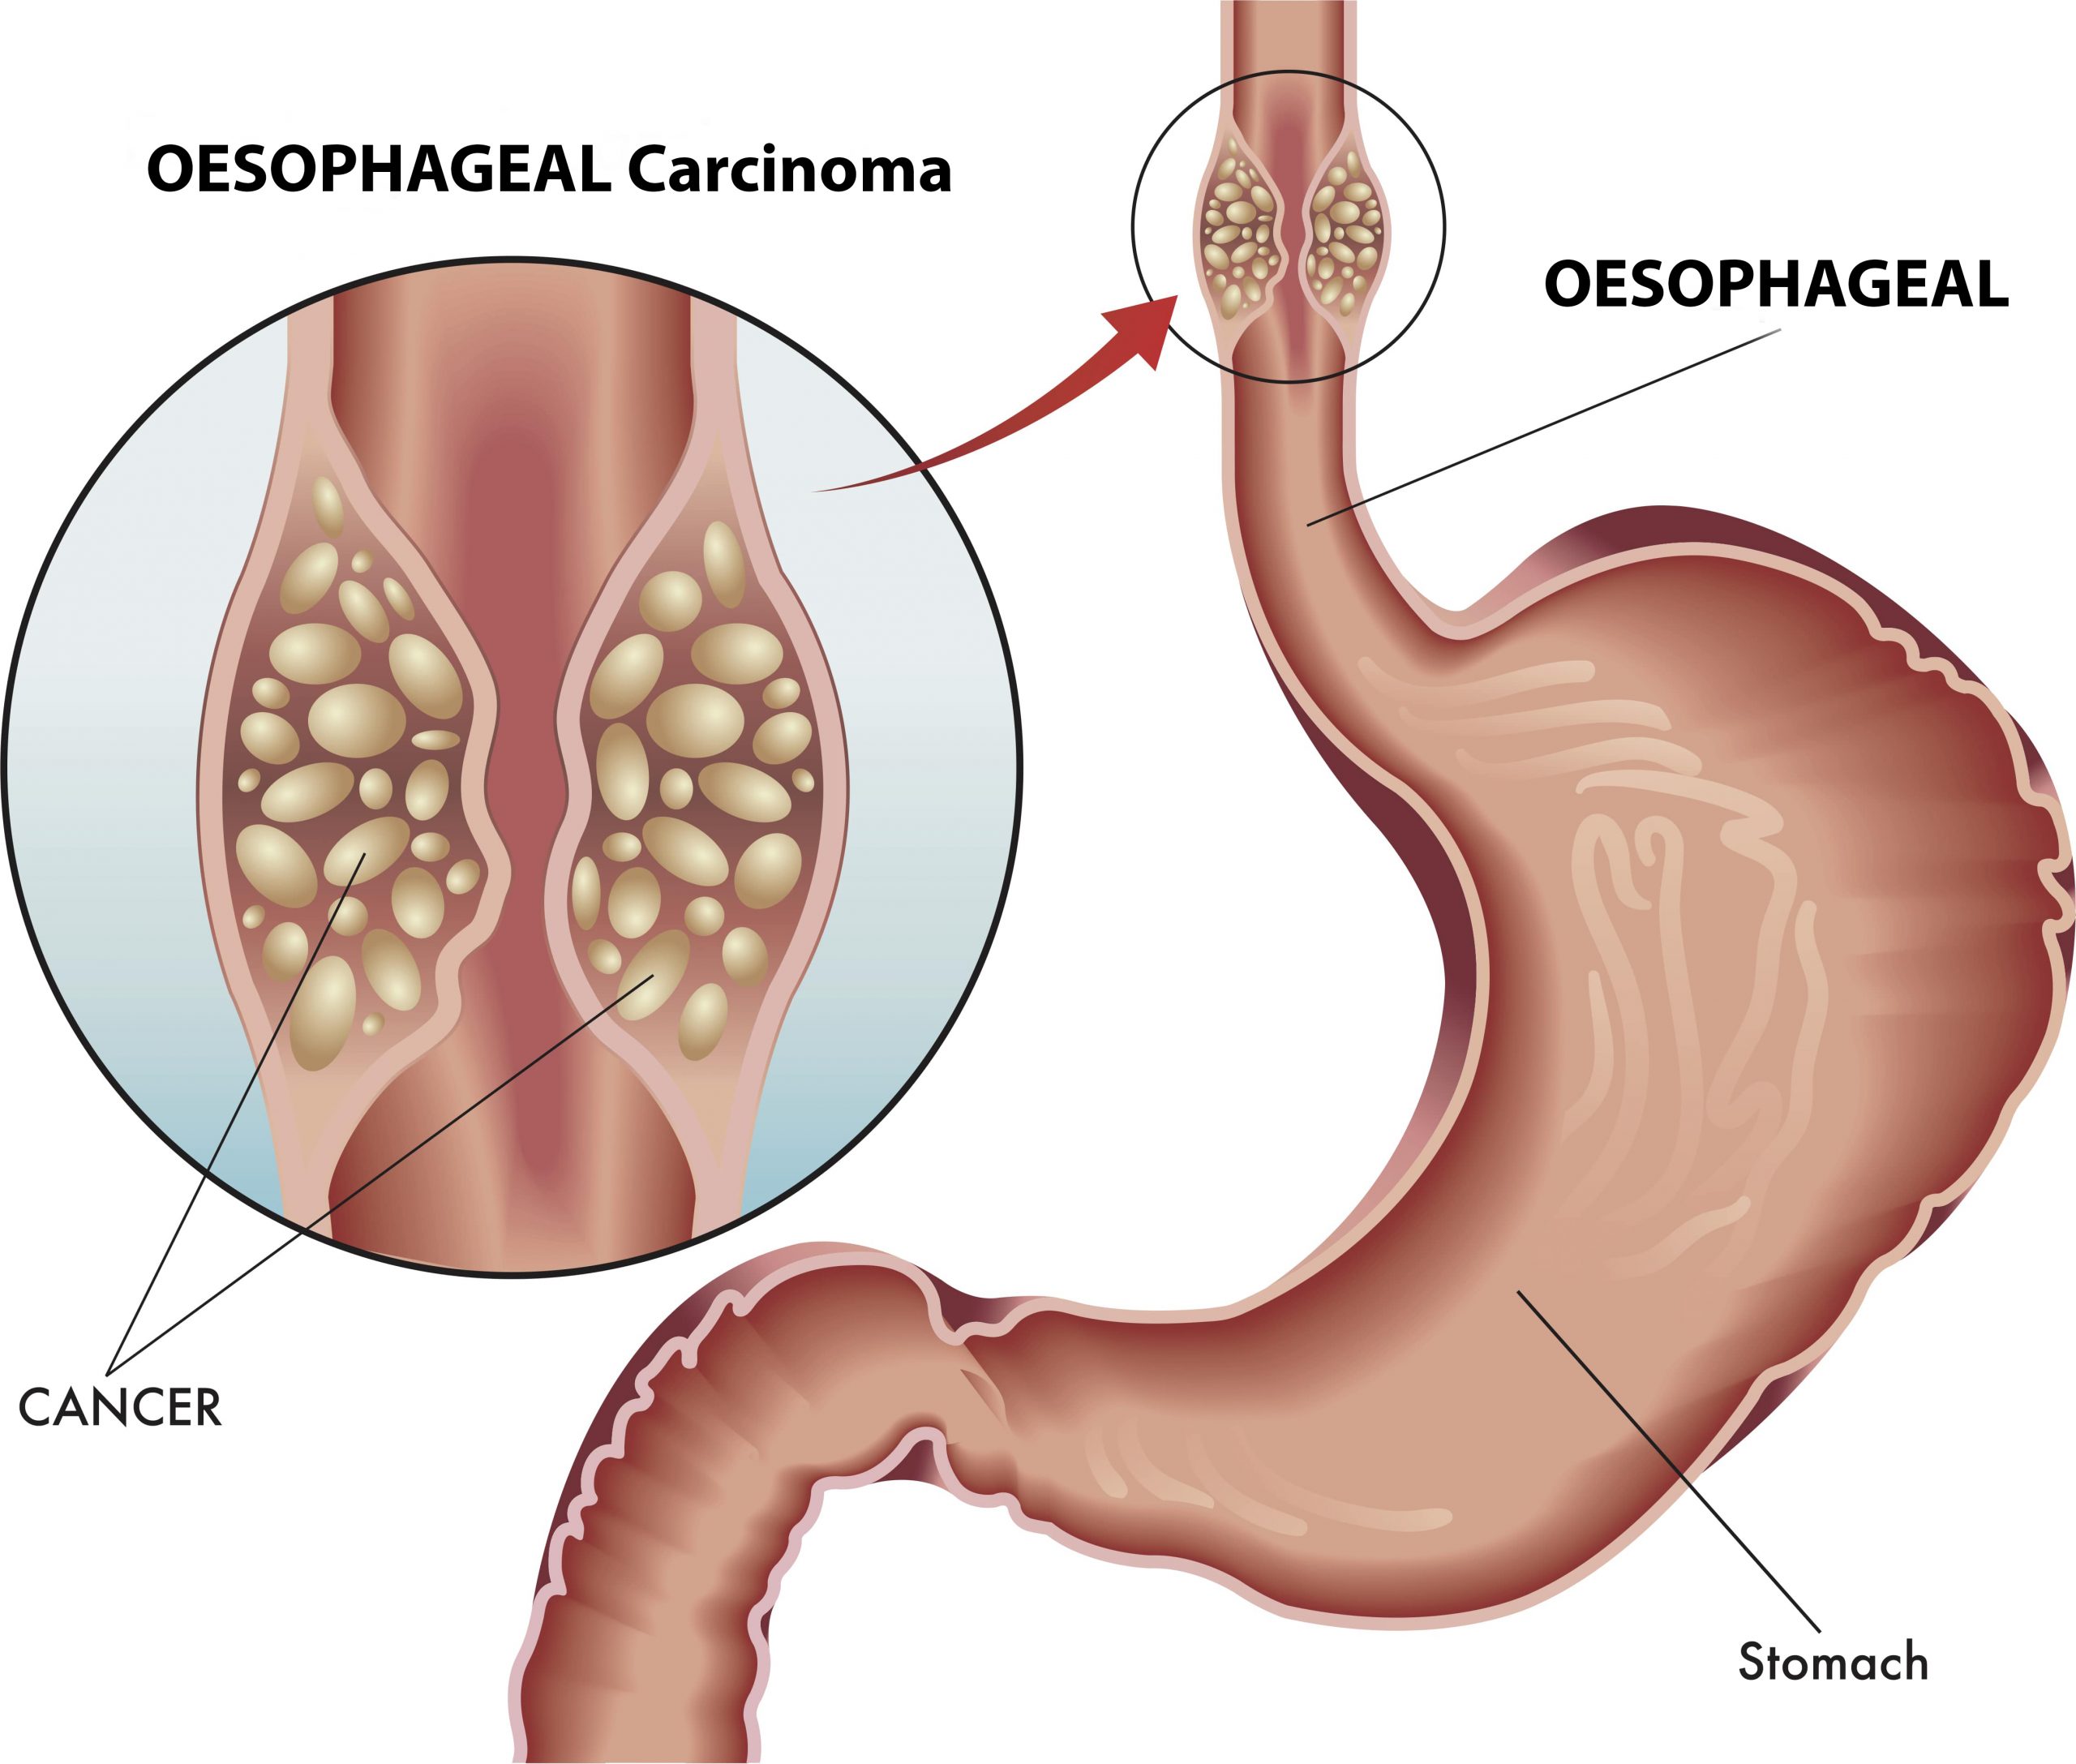 Stomach Cancer and Esophageal Cancer